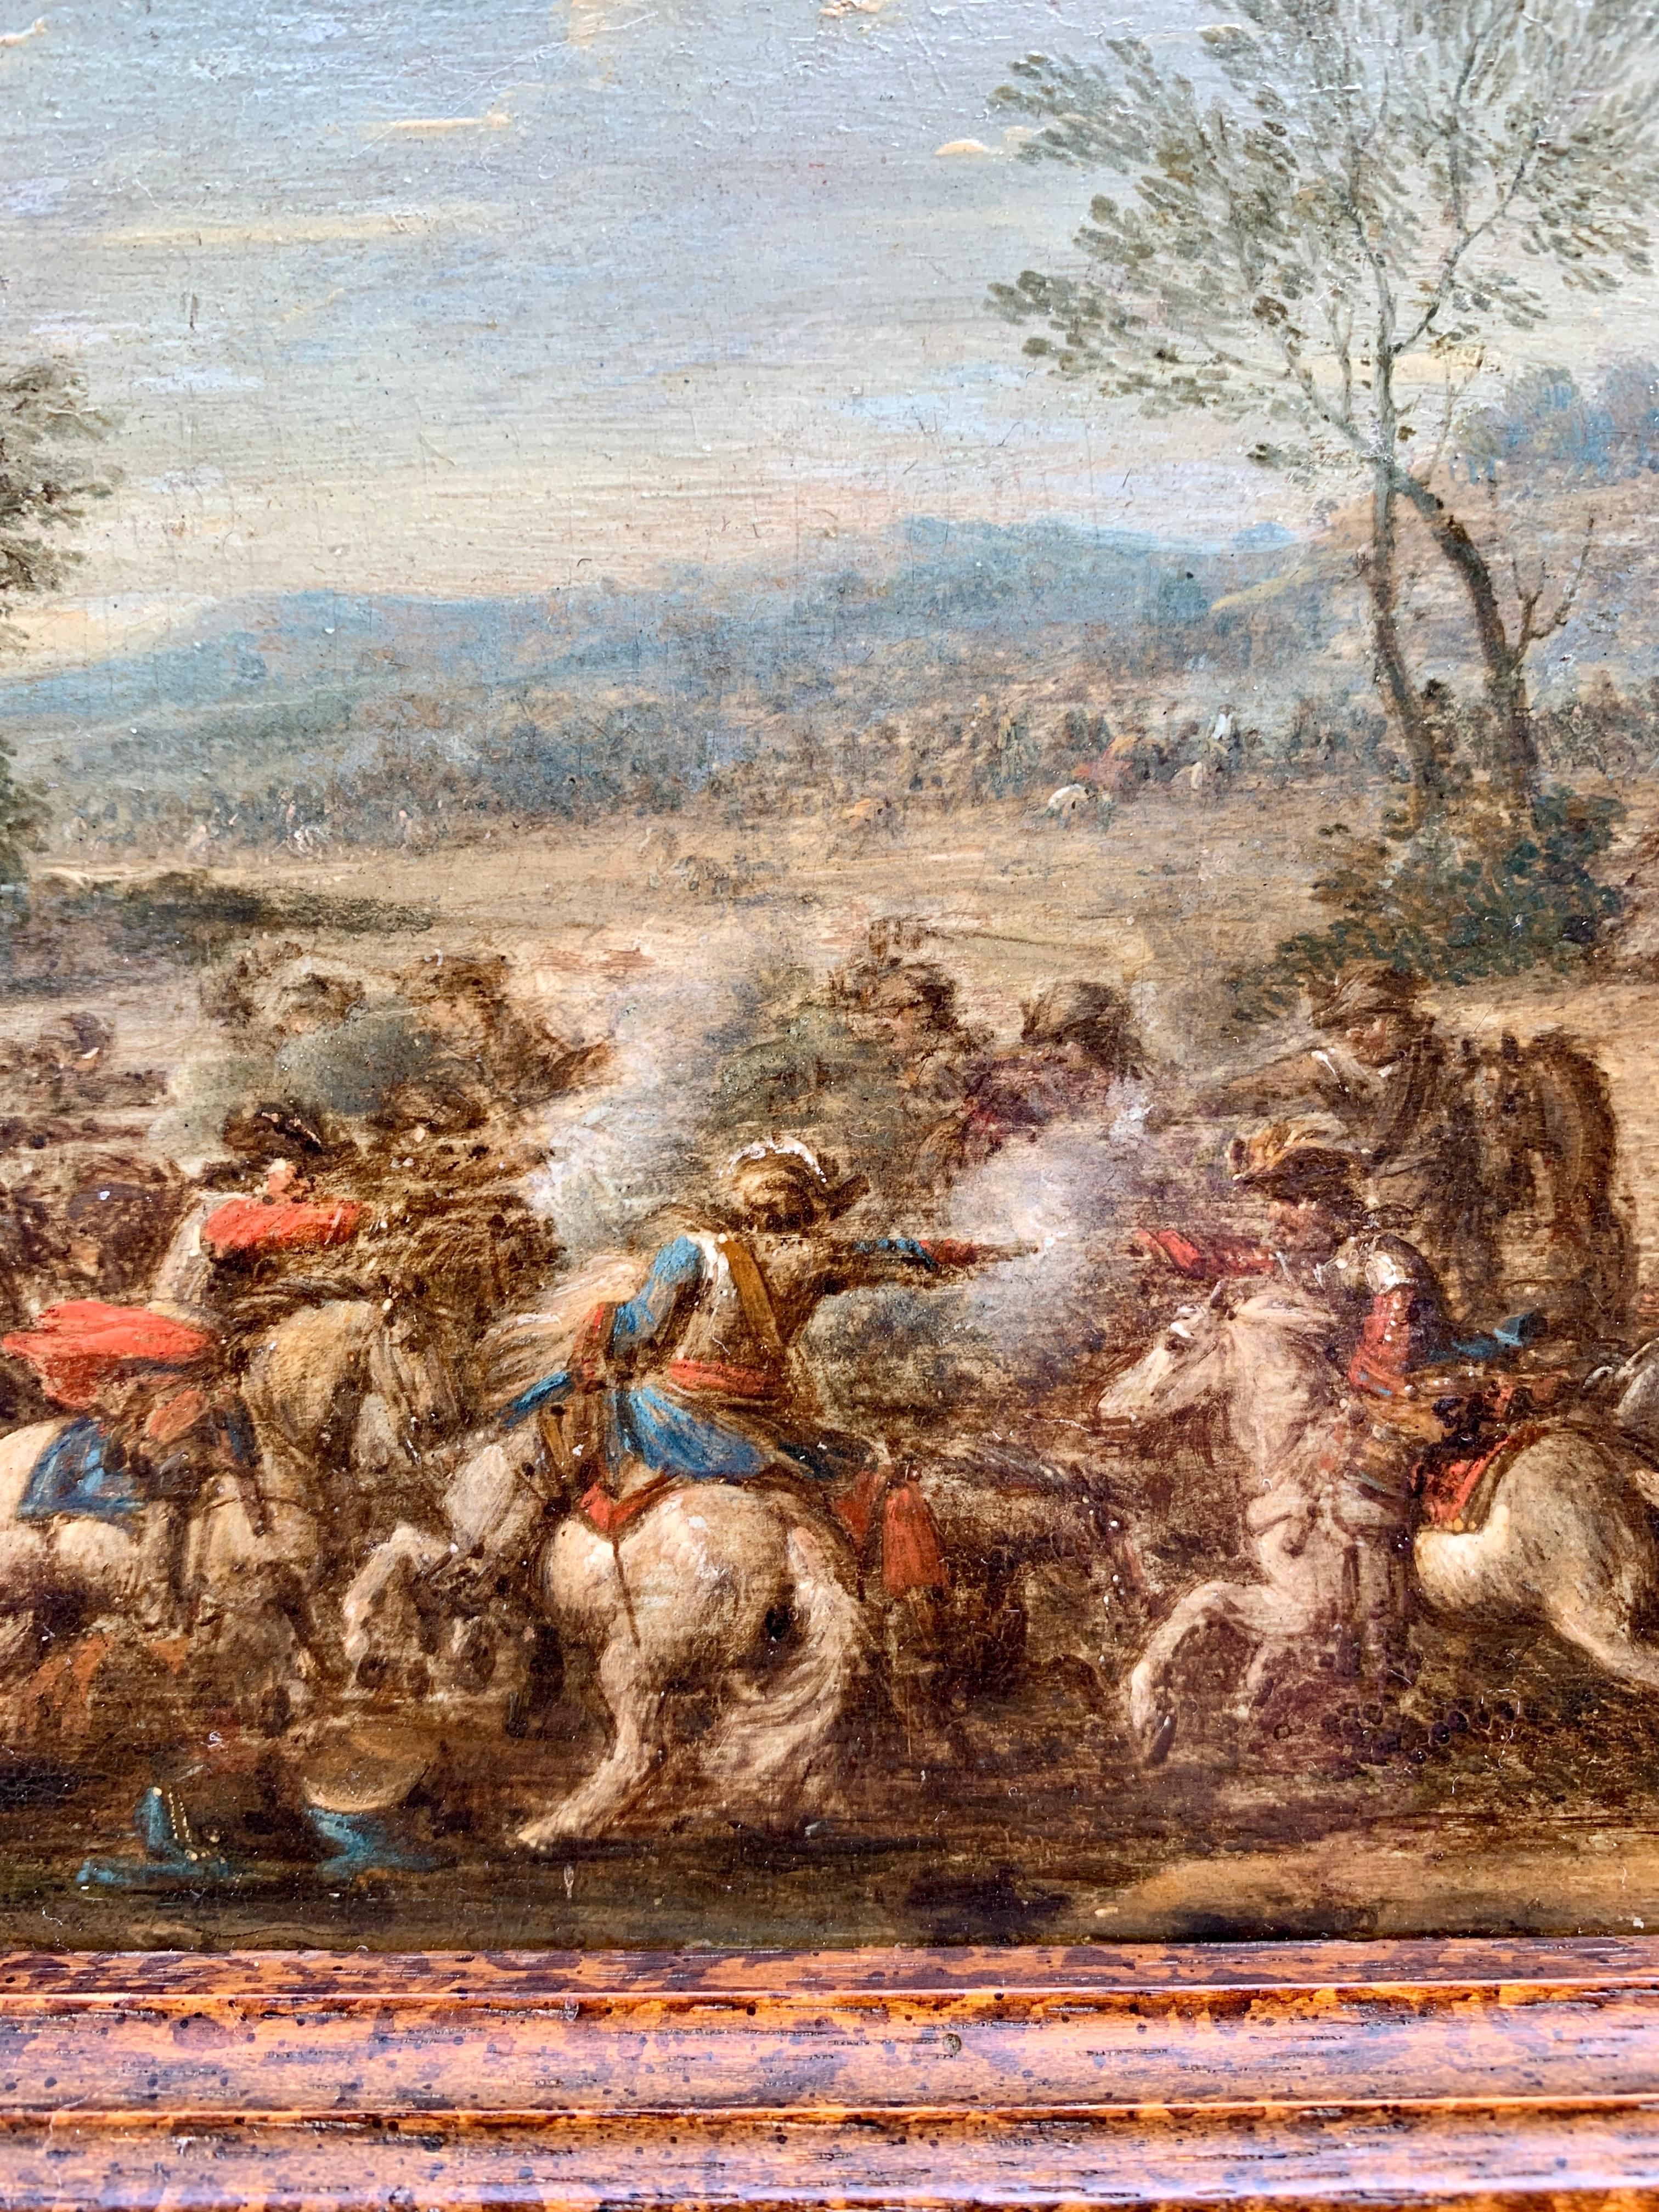 Antique 17th or 18th century Dutch Men on horses in Battle in a landscape - Painting by Karel Breydel